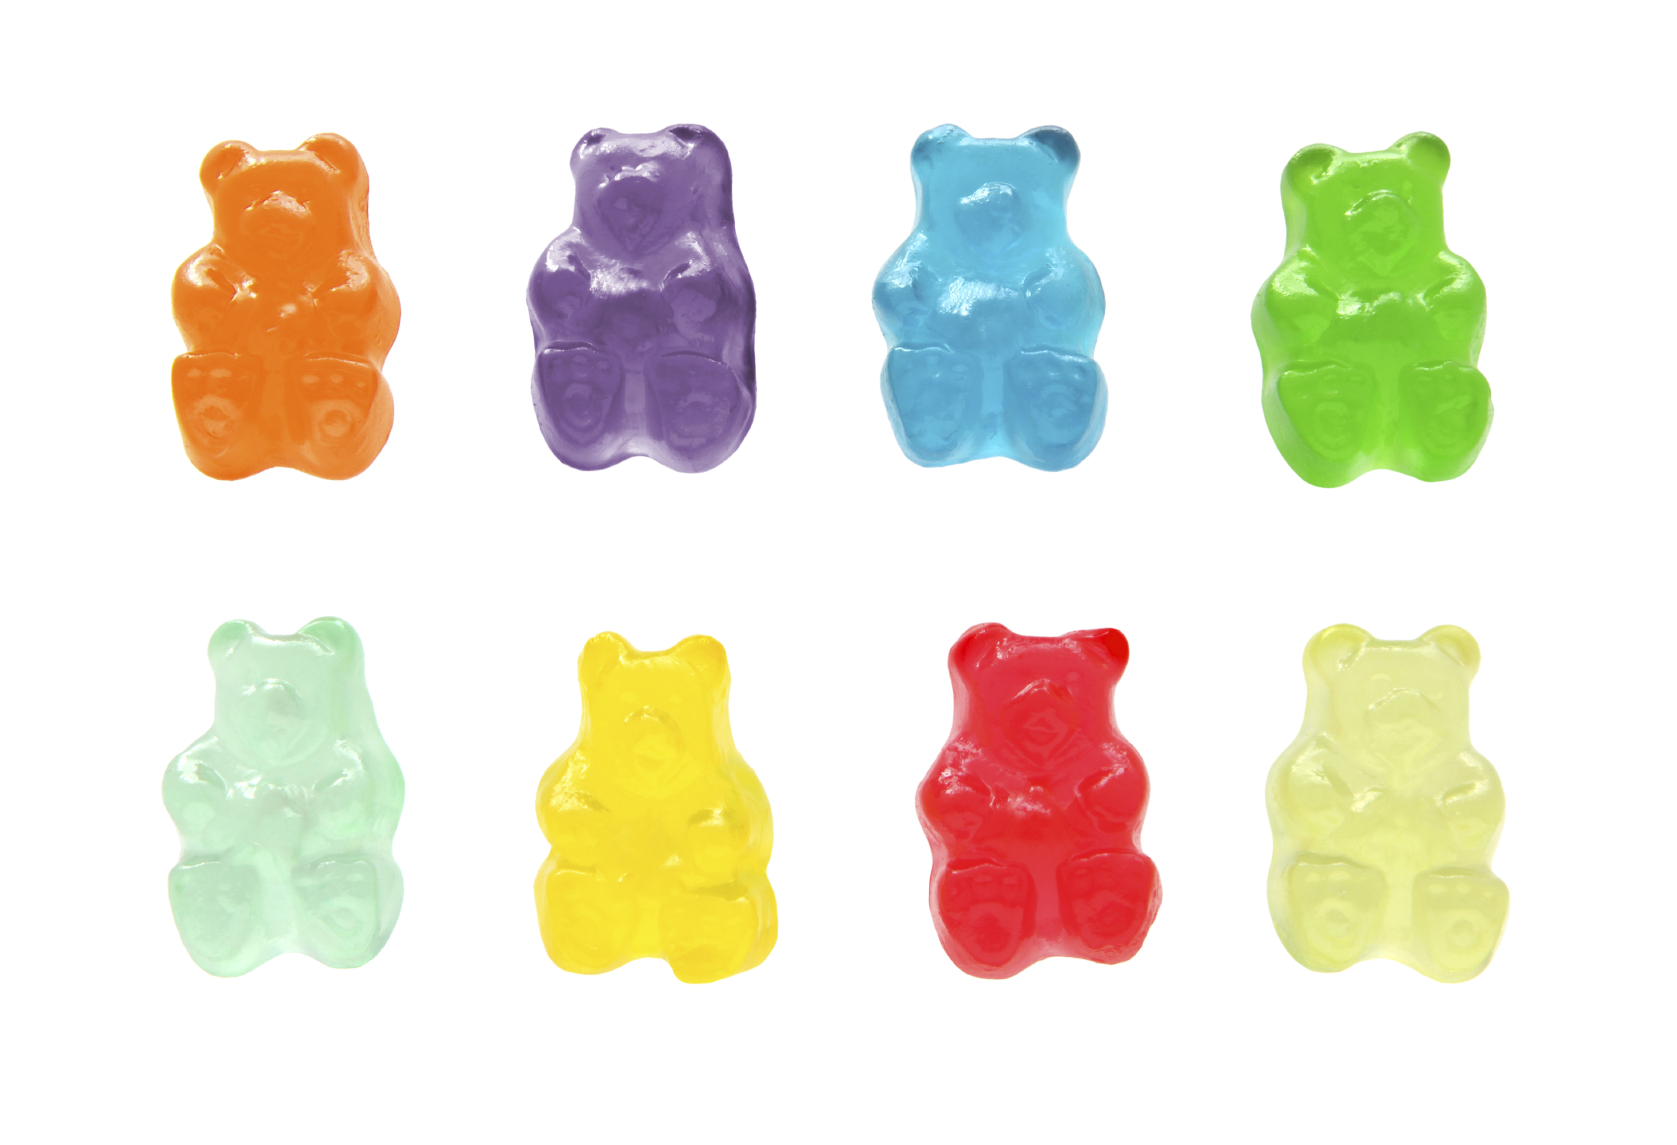 Clip Arts Related To : gummy bear laptop background. view all Gummy Bears)....